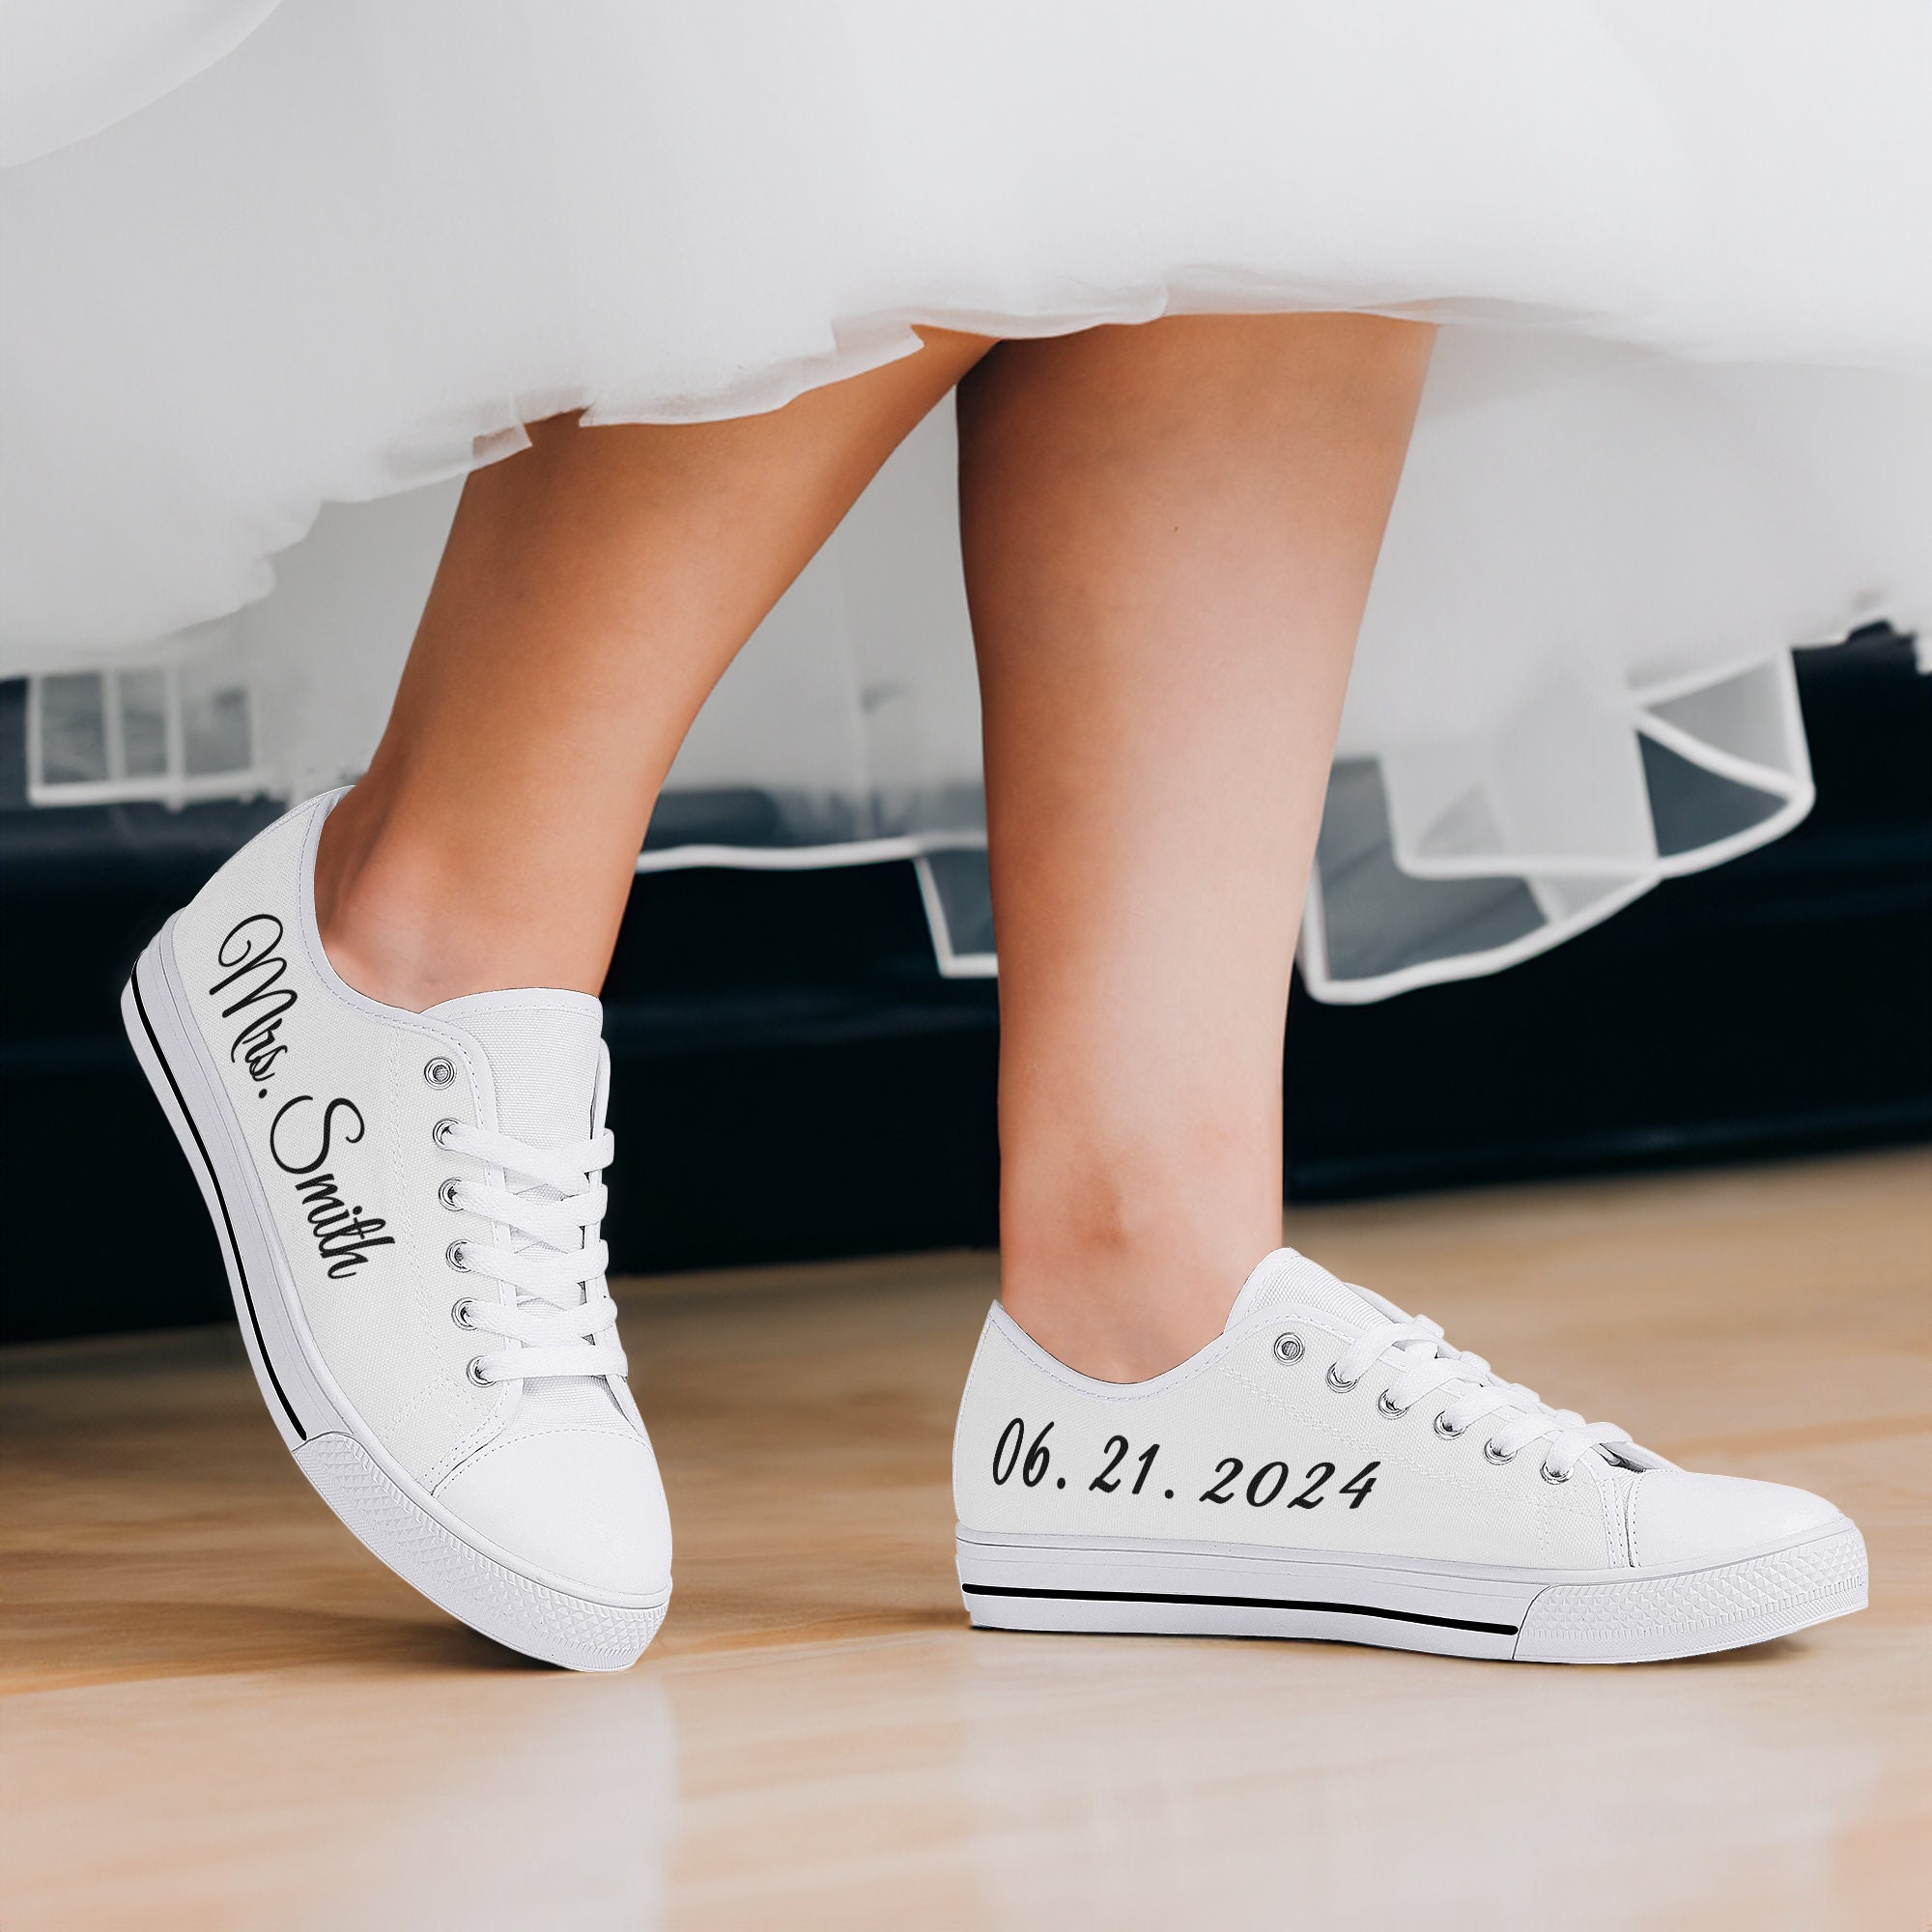 Perfect Pastel Wedding Colors, Playful Disco Ball Decor + Chanel Bridal  Sneakers - Green Wedding Shoes